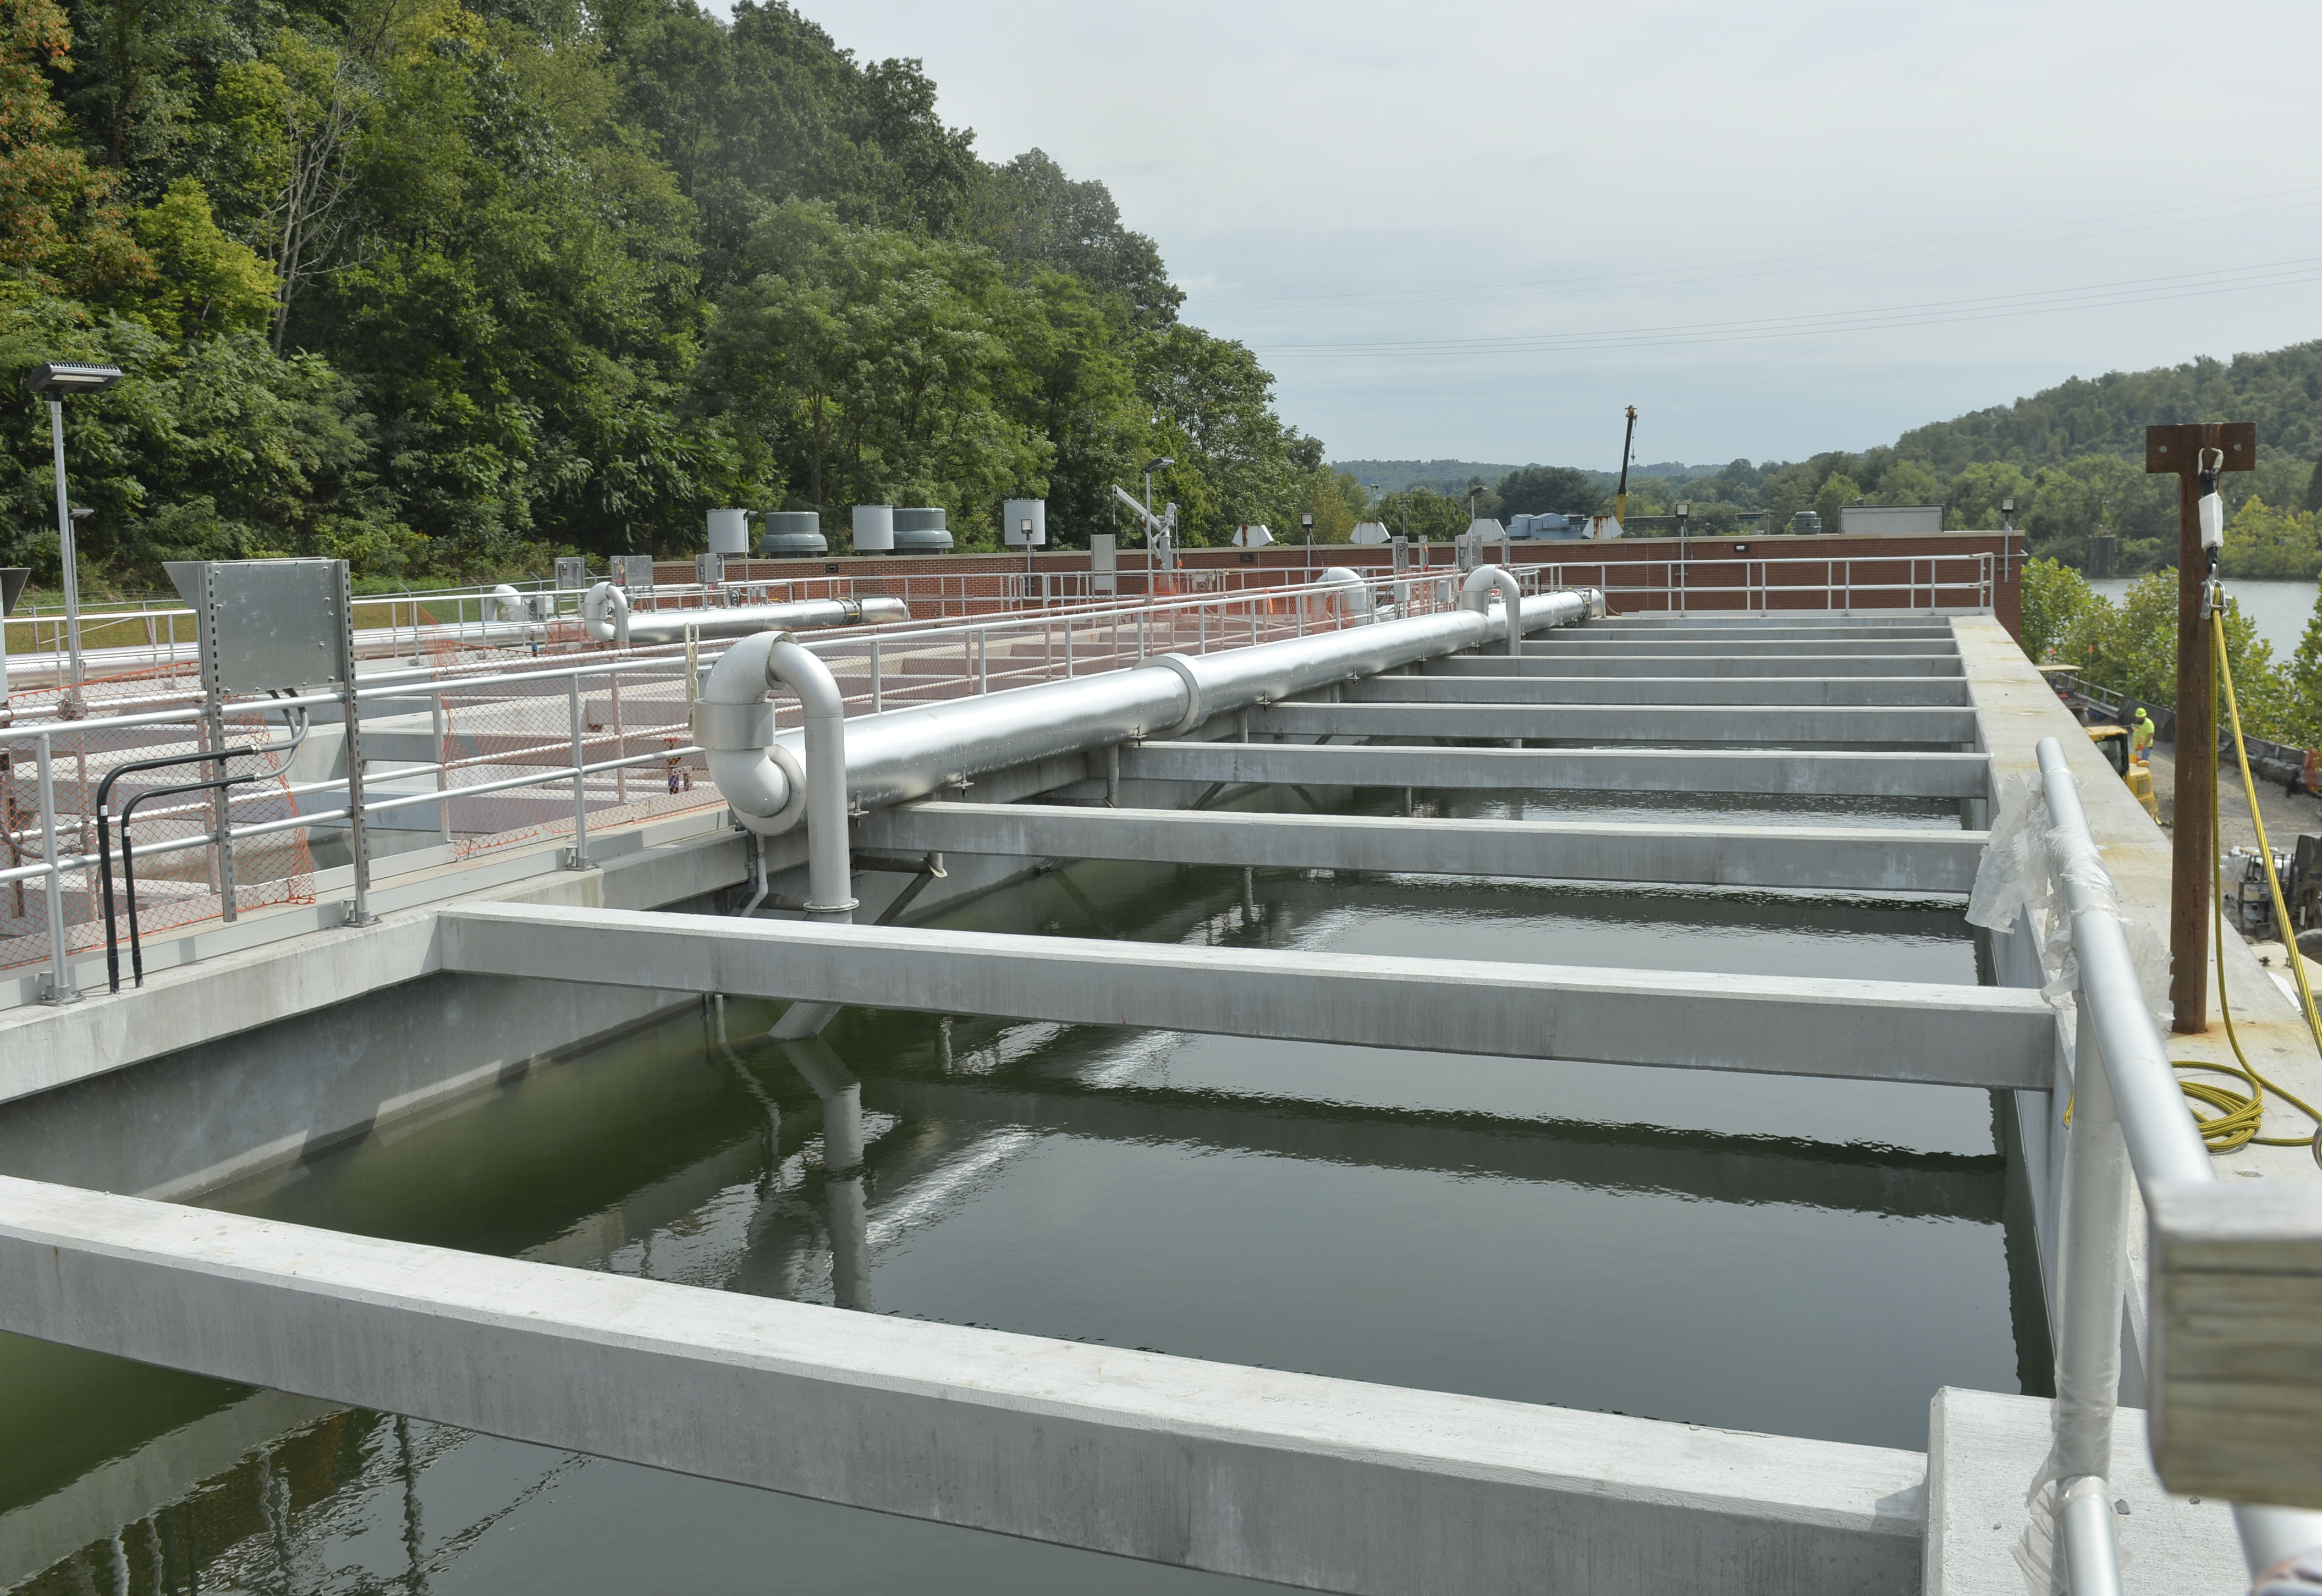 Wastewater treatment plant project wrapping up in early 2022